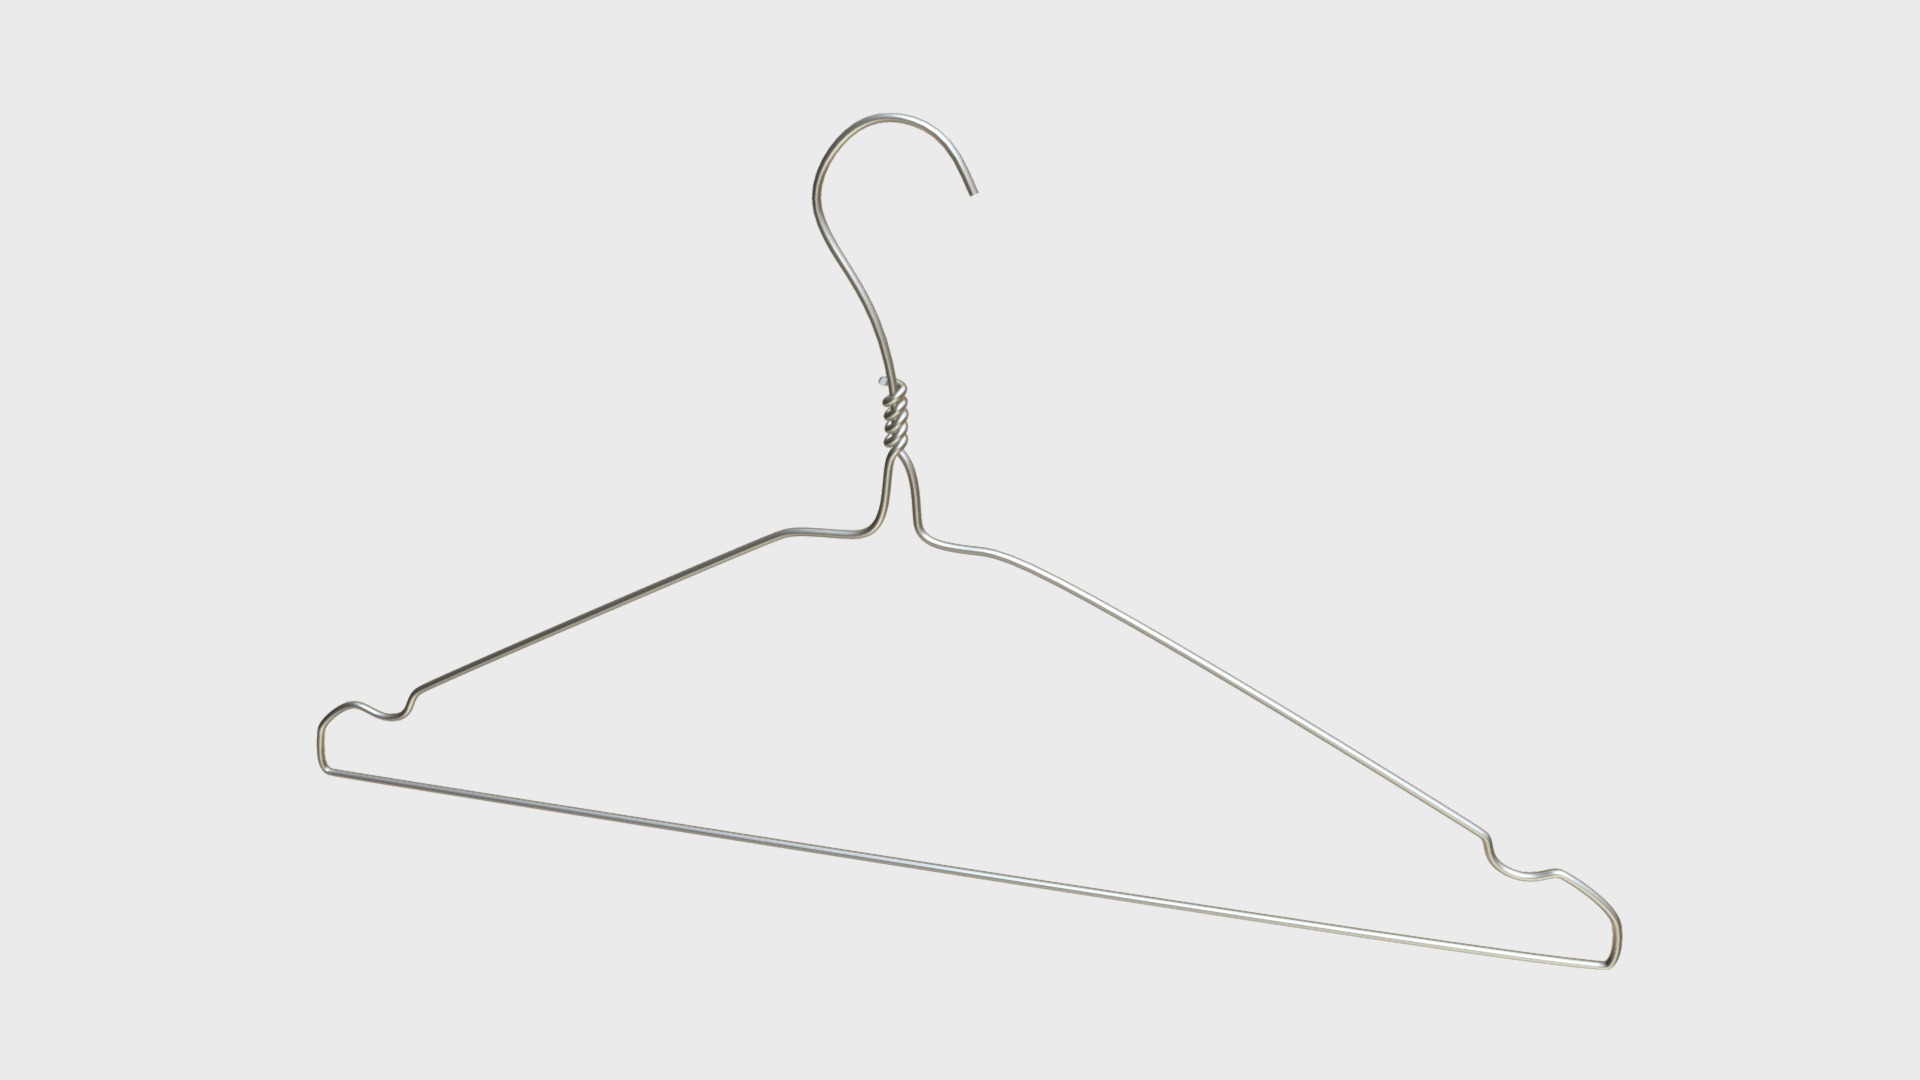 3D model Metal wire coat hanger - This is a 3D model of the Metal wire coat hanger. The 3D model is about a drawing of a question mark.